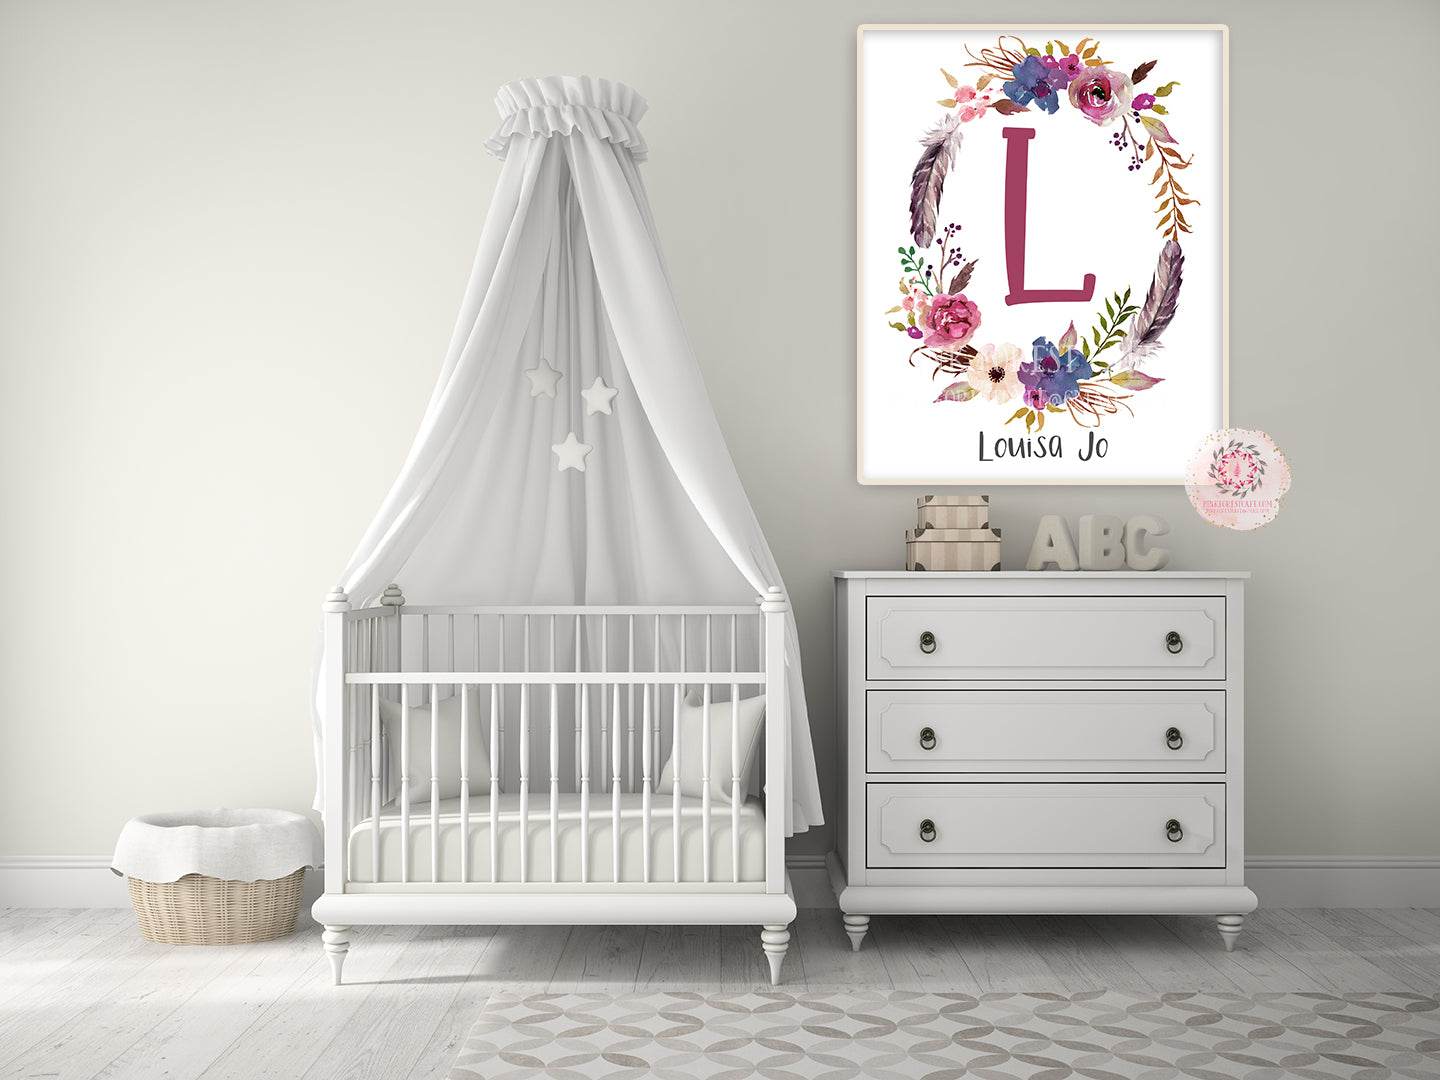 Boho Baby Name Monogram Initial Personalized Wall Art Print Tribal Feather Gift Watercolor Floral Baby Nursery Printable Decor